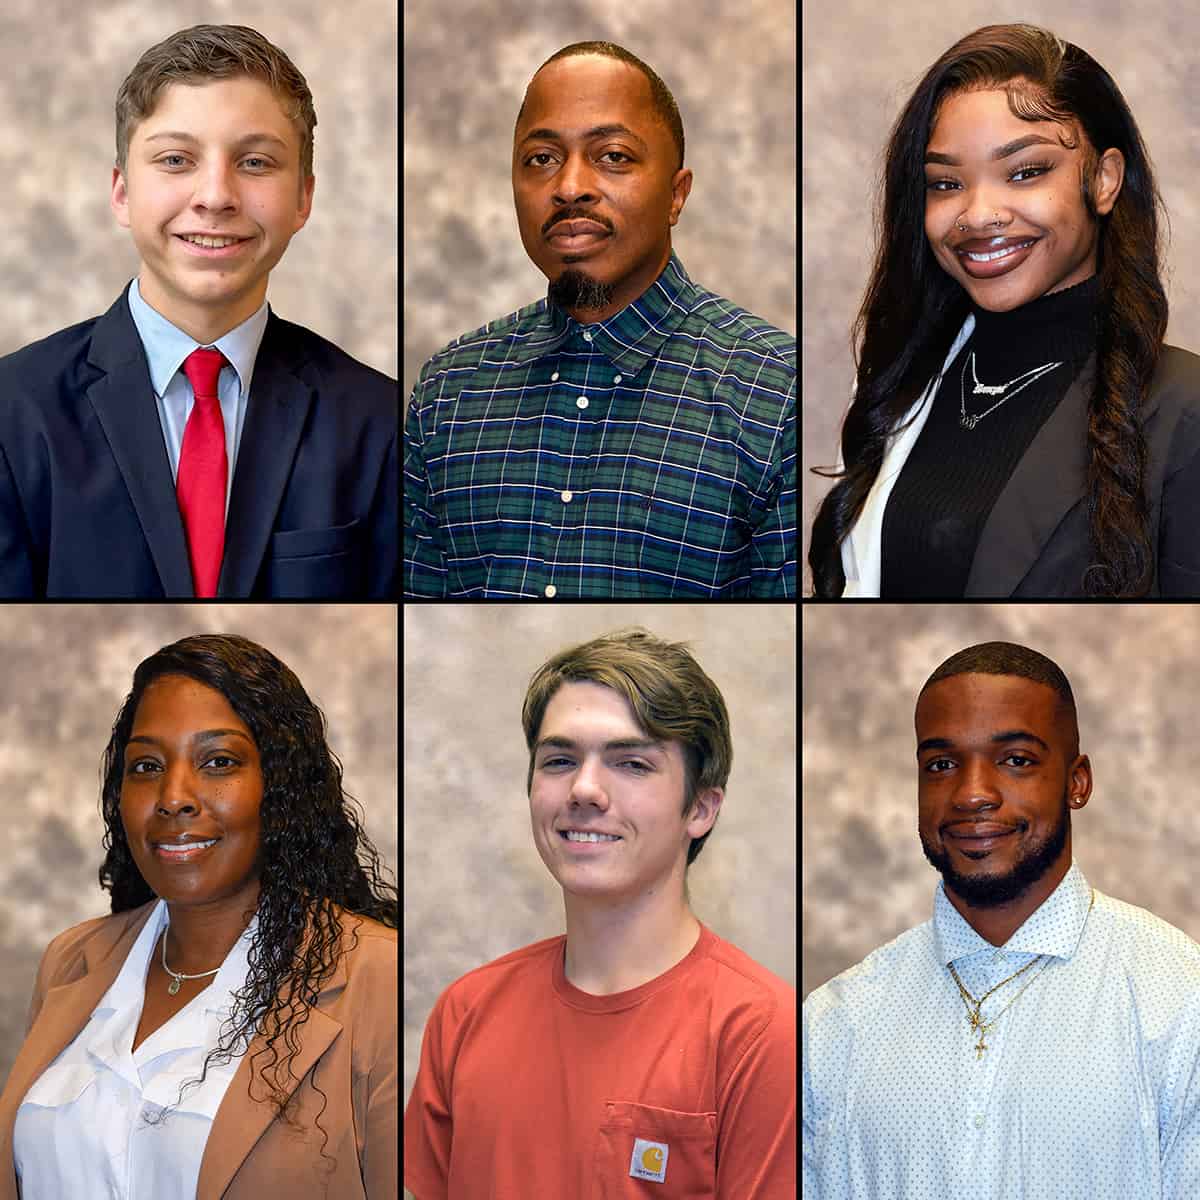 Pictured are the finalists to represent SGTC in the TCSG GOAL competition. Top row (l-r): Joshua Bartlett, Damon Brown, and Katlin Champion. Bottom row (l-r): Diquita Mathis, Zackary Mincey, and Eddie Williams.